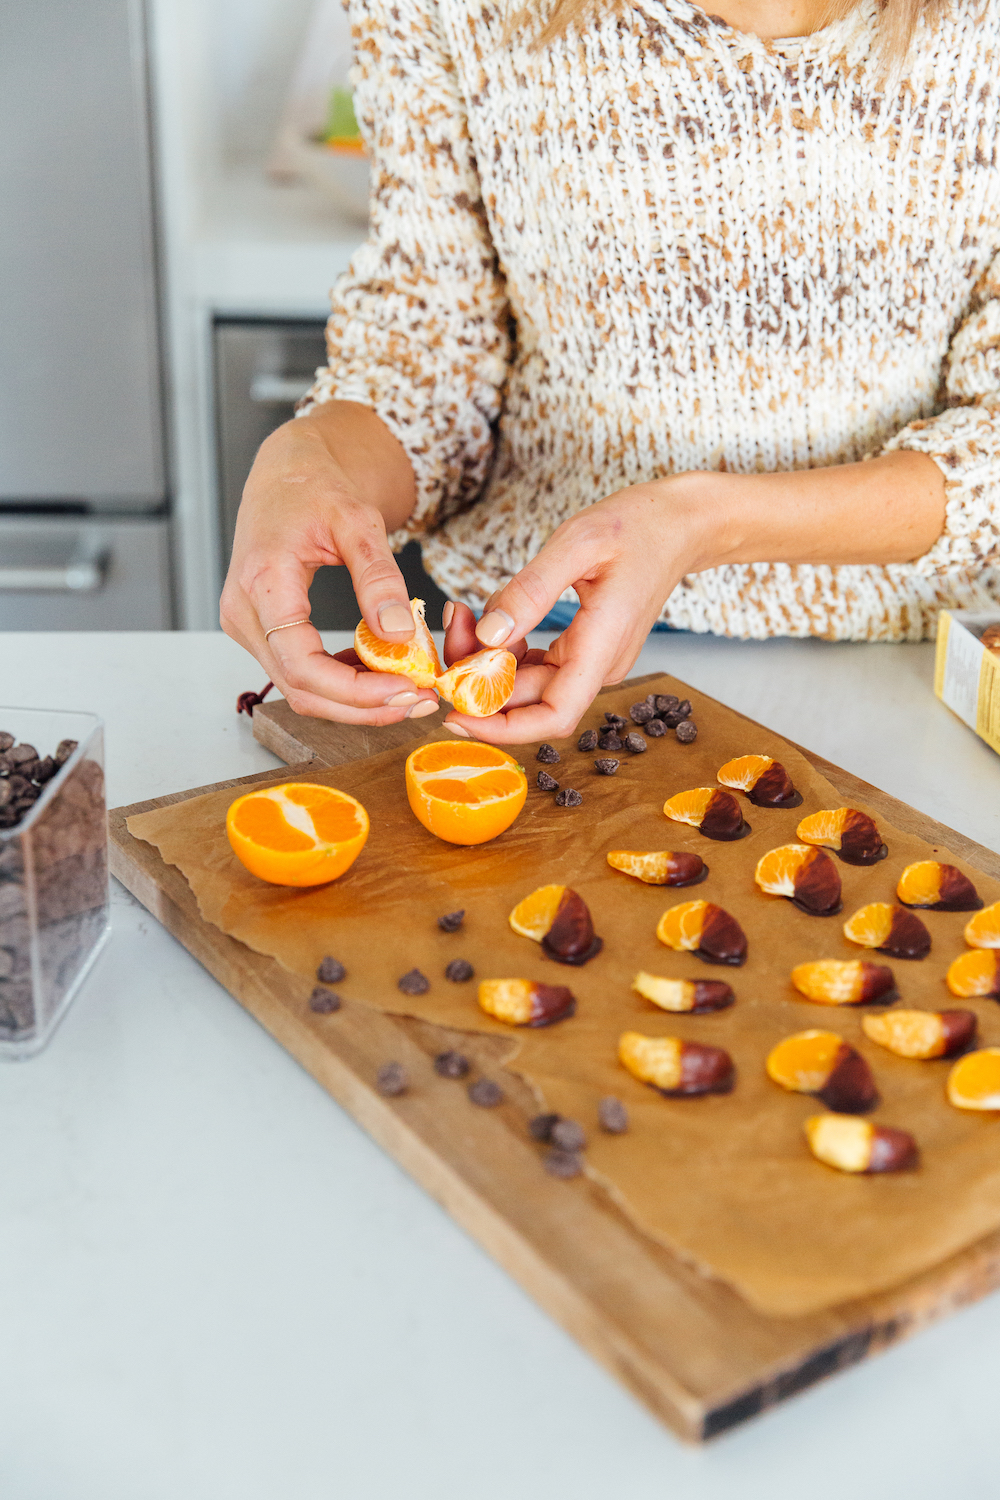 easy healthy snack idea oranges dipped in chocolate